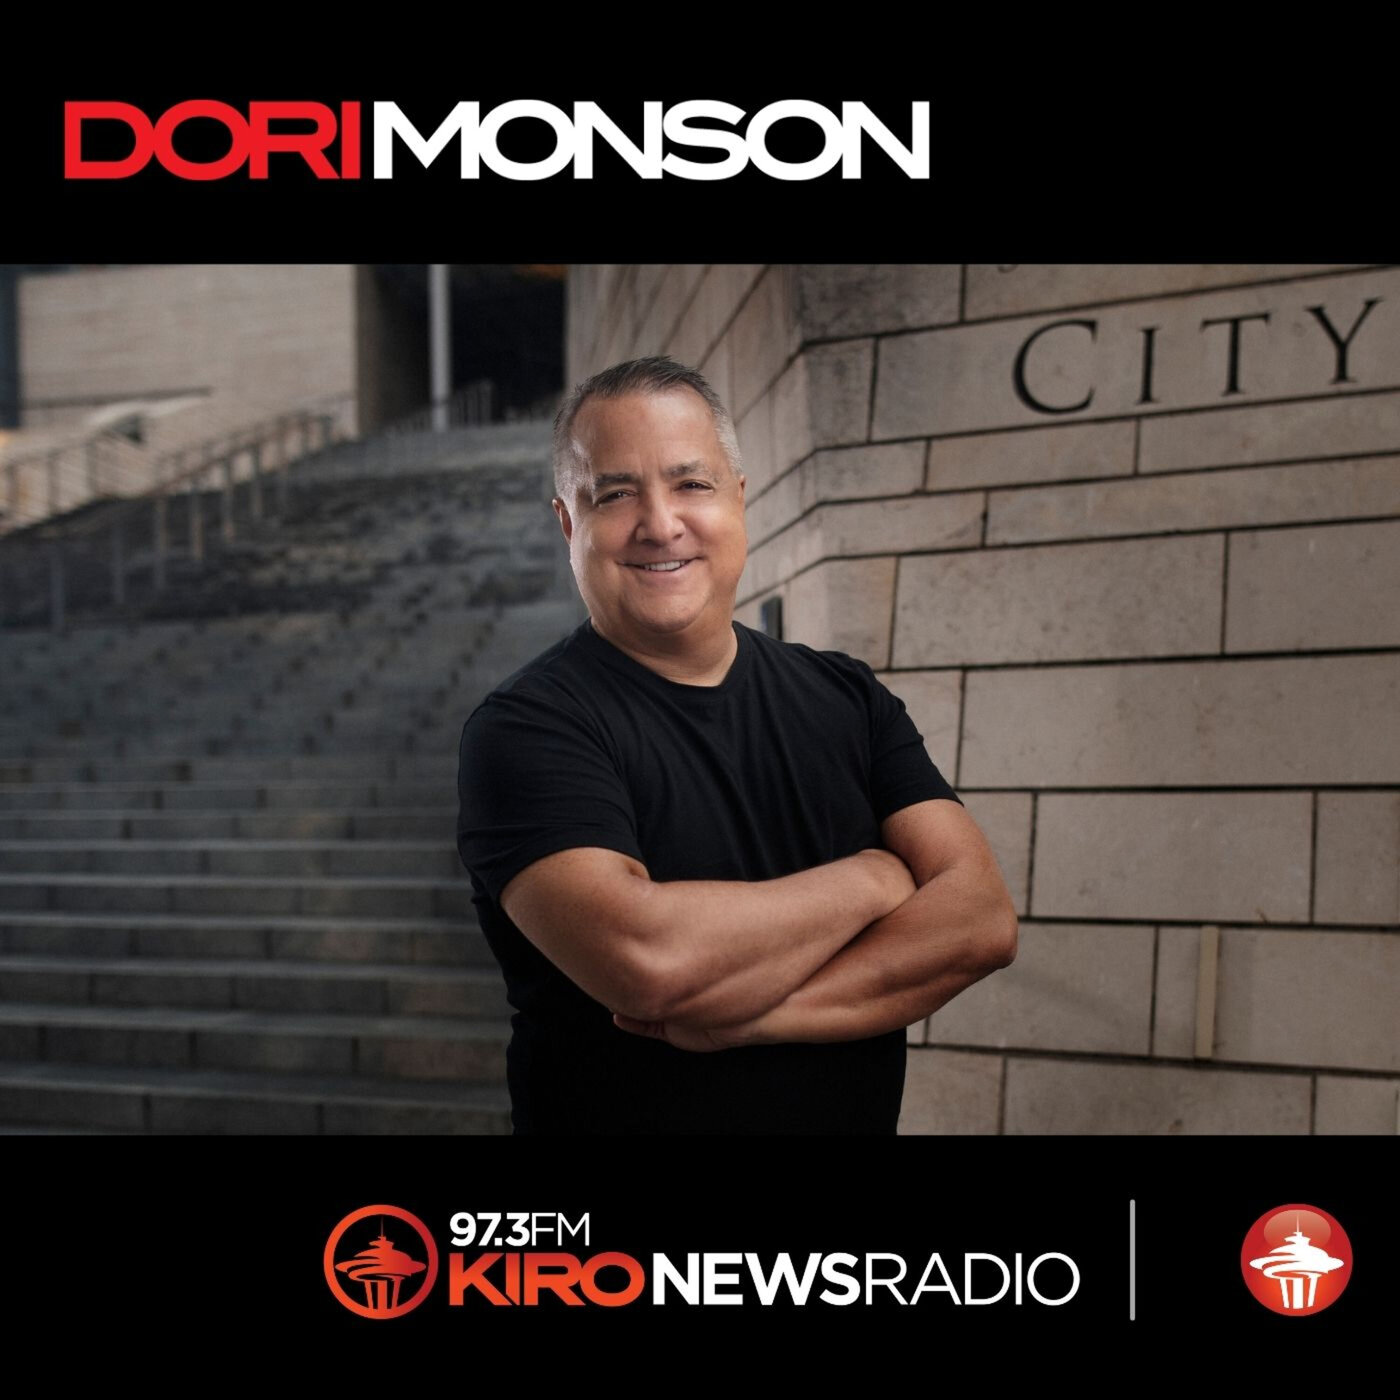 The Very Best of the Dori Monson Show, Day 2: Hour 3